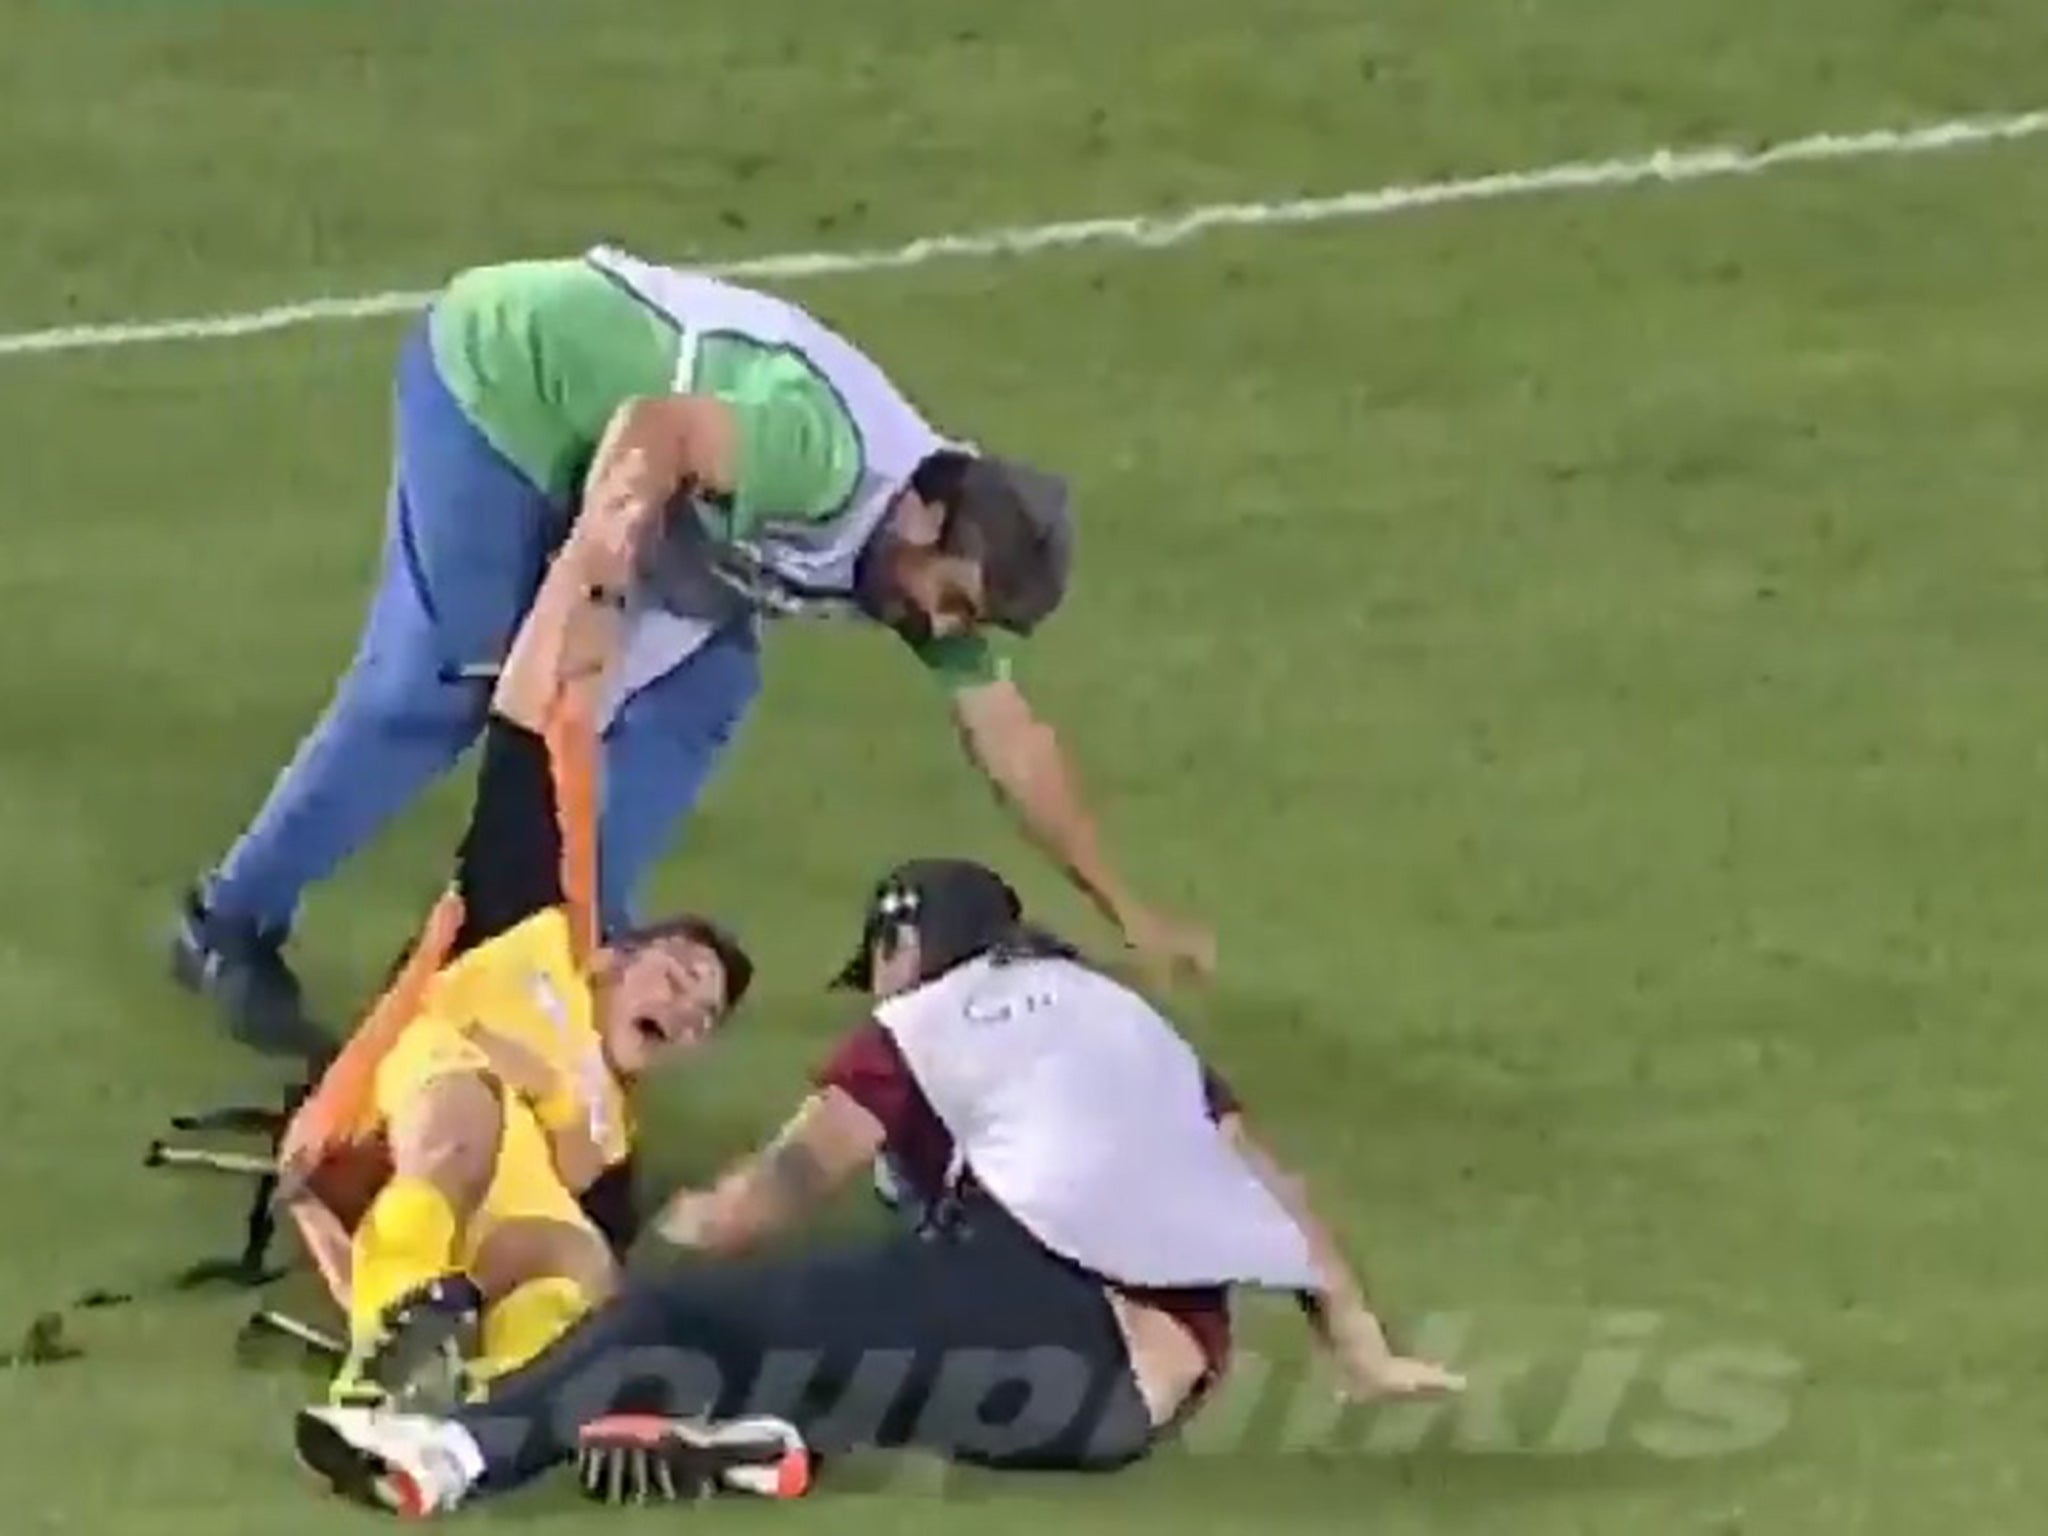 The medics fail miserably to carry the player off the pitch